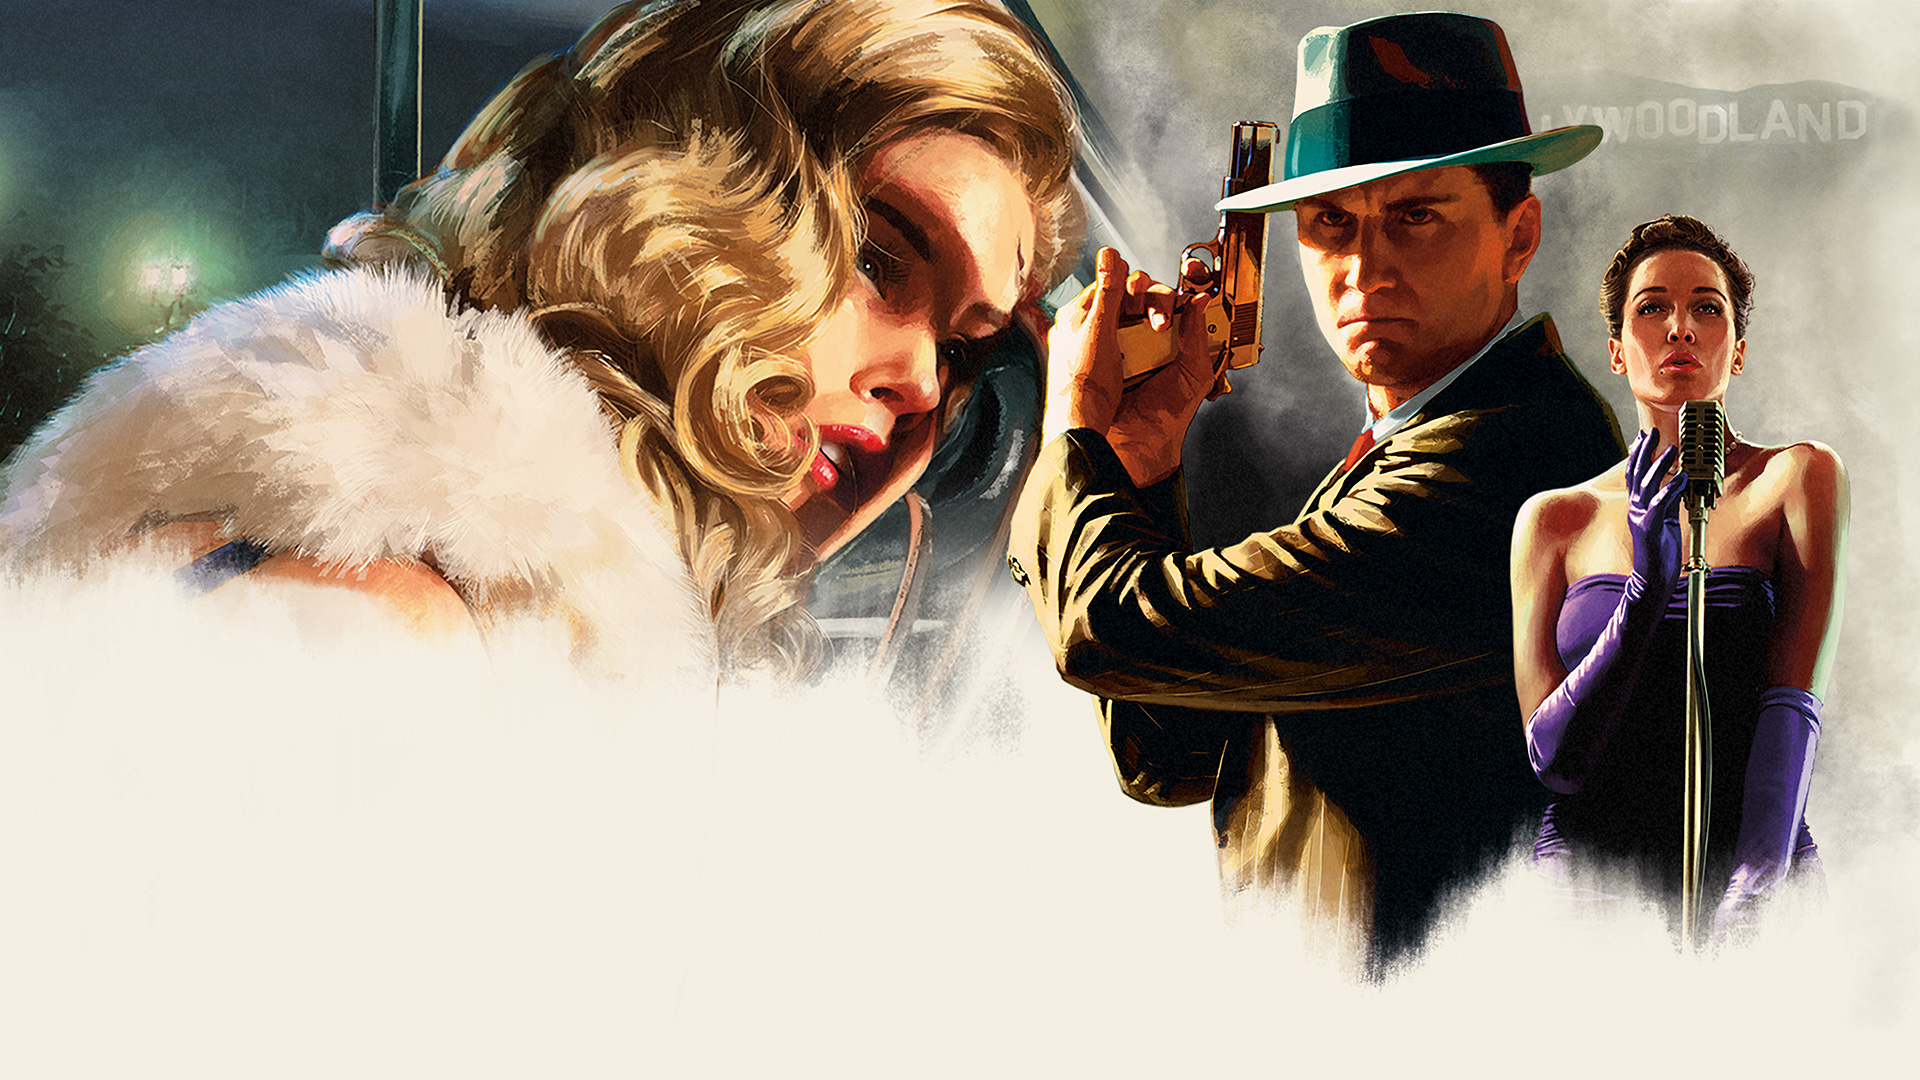 12 Years Later, L.A. Noire is Still an Excellent Experience